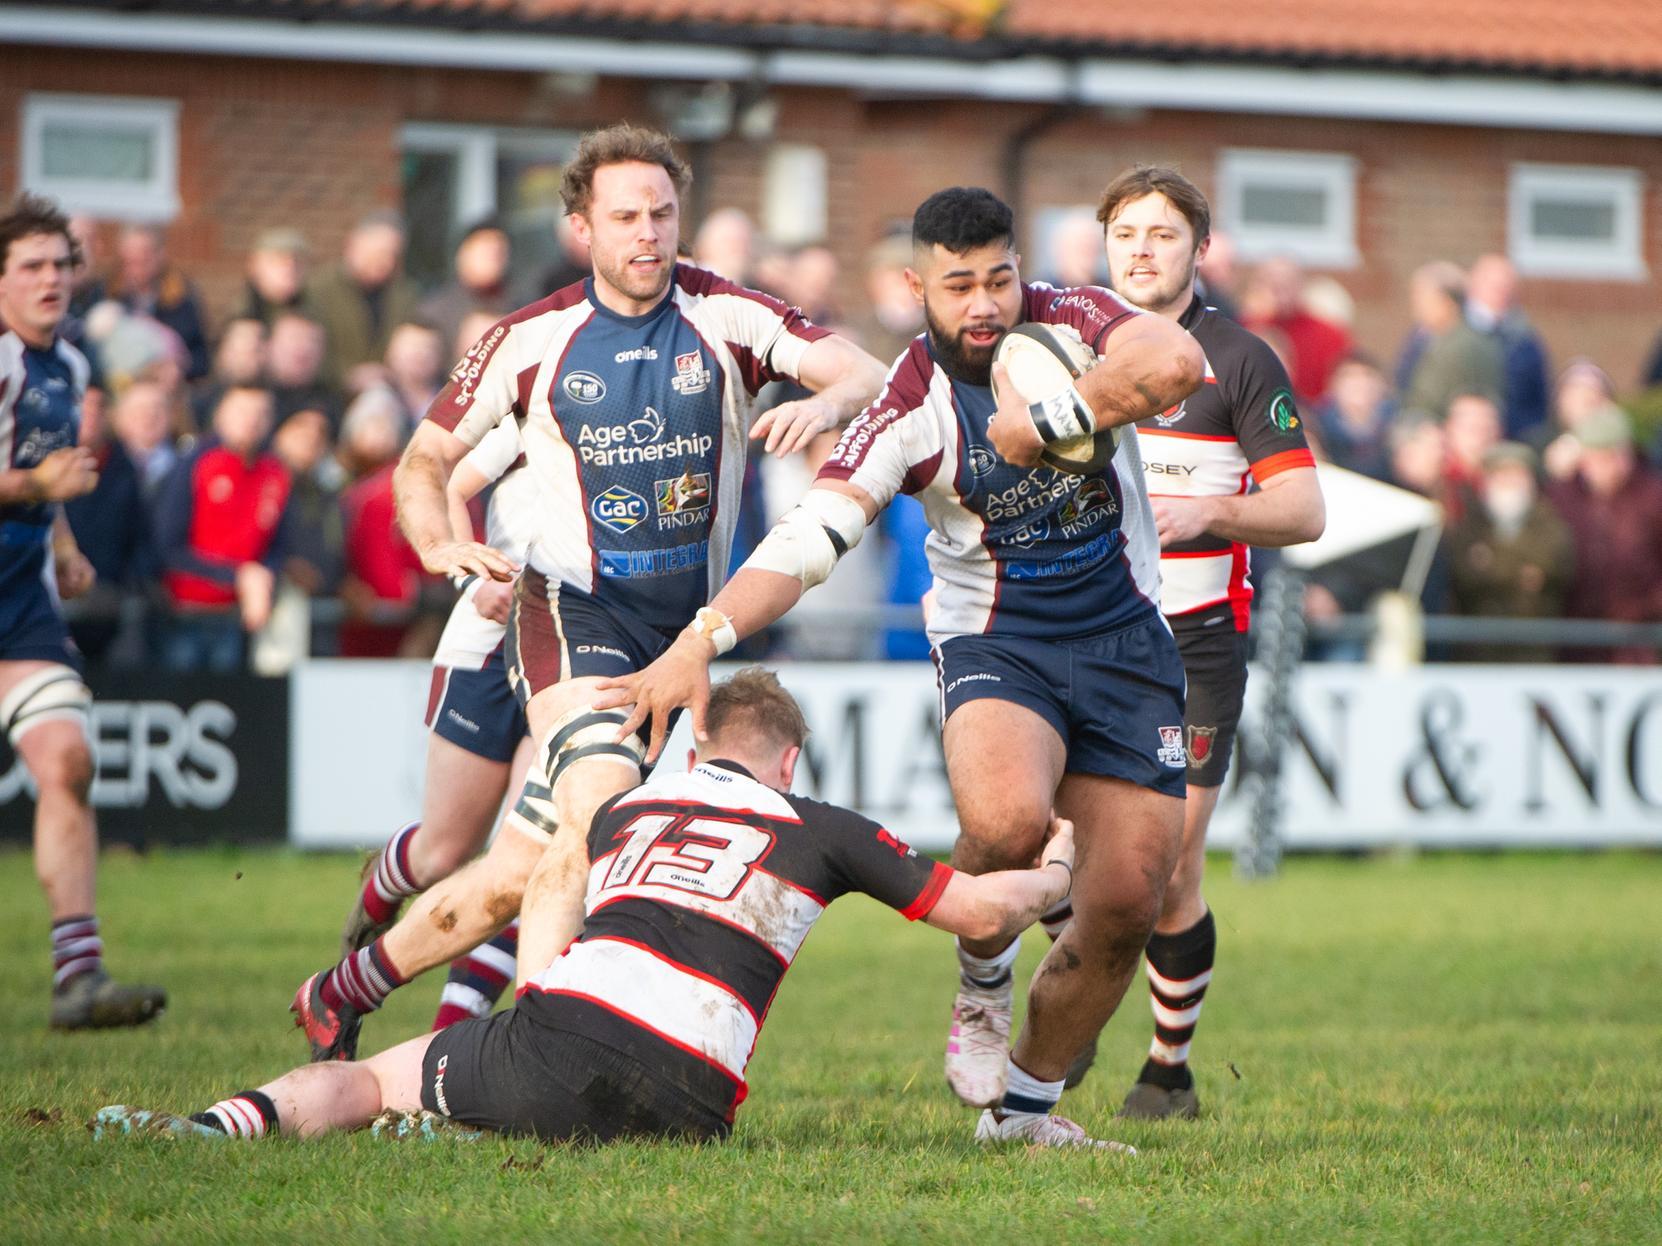 Malton & Norton 31-24 Scarborough RUFC / Pictures by Andy Standing